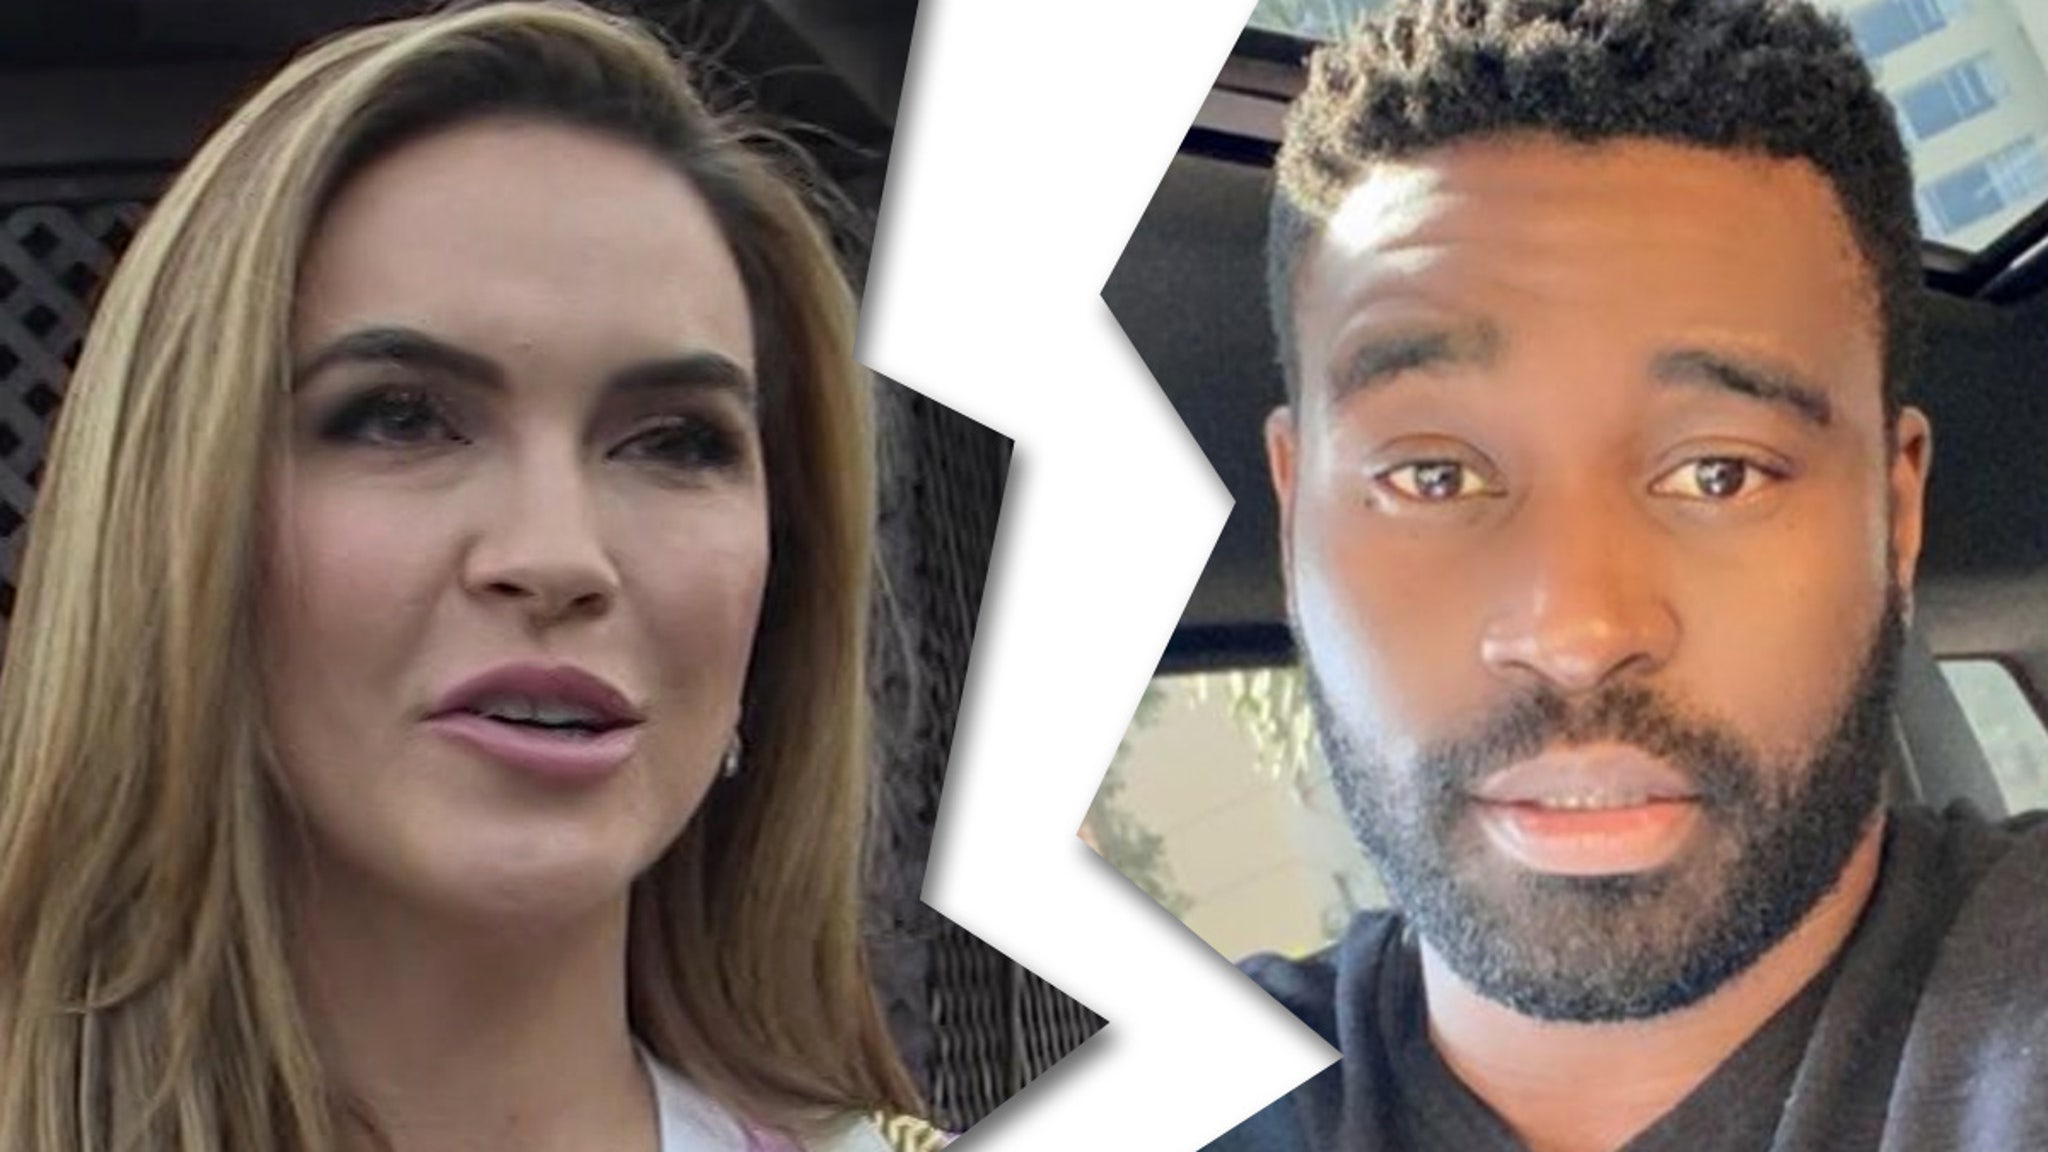 Chrishell Stause and Keo Motsepe Split After 3 Months of Dating - TMZ